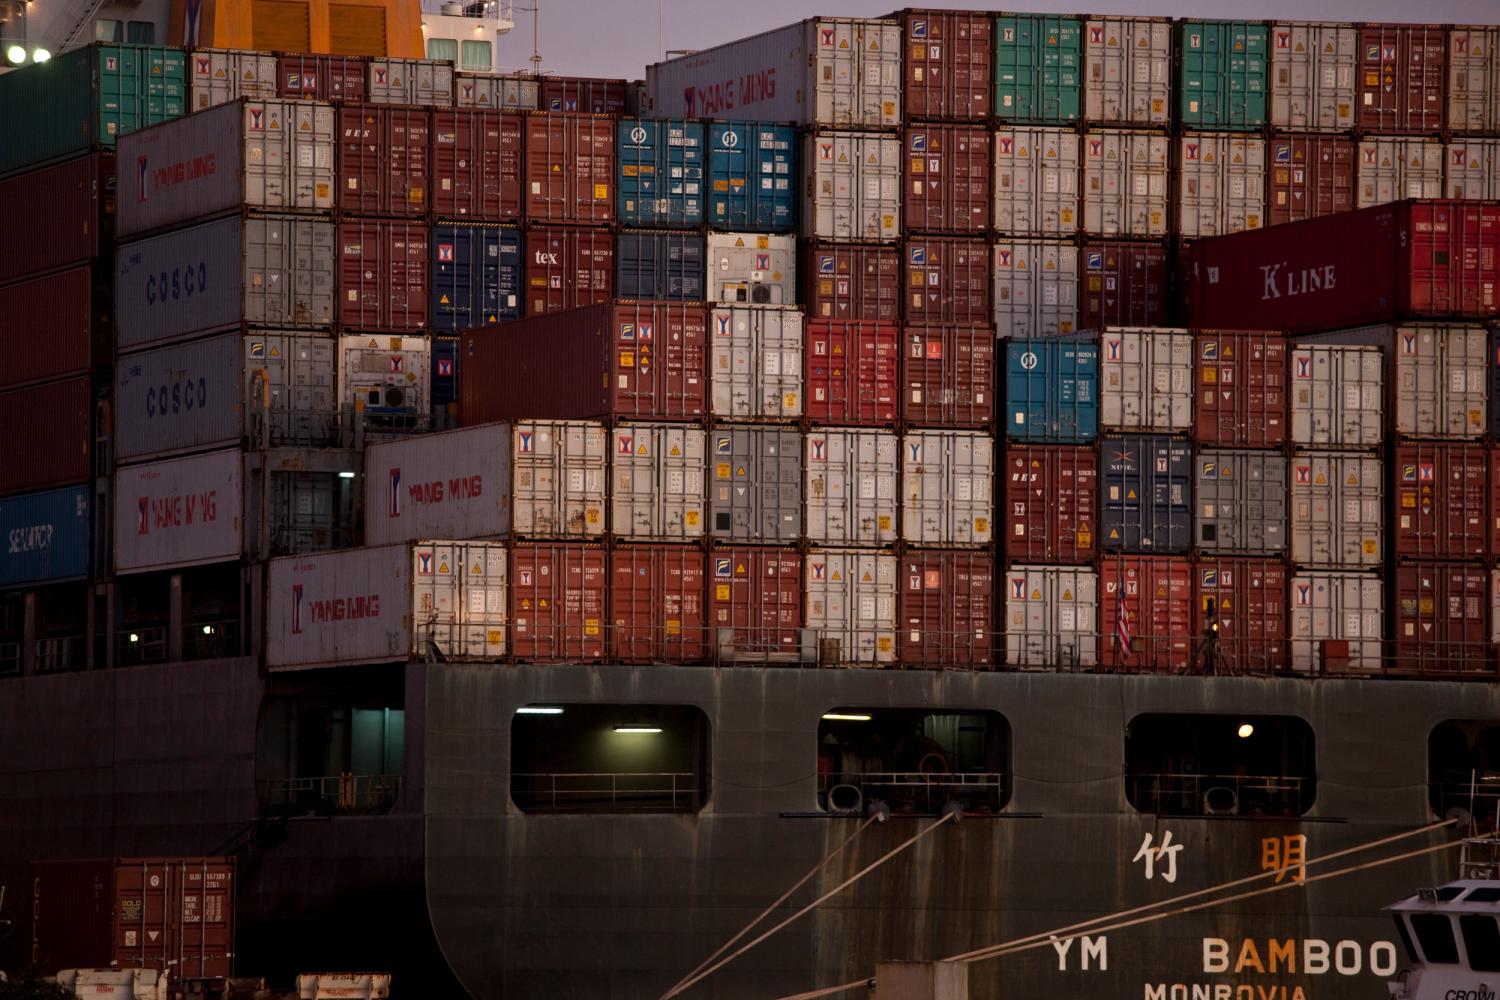 The YM Bamboo, a container ship operated by the China Ocean Shipping Company (COSCO) is docked at the Port of Oakland in Oakland, California January 14, 2011. Chinese President Hu Jintao will bring new business deals and possible commitments to buy U.S. beef and software when he visits Washington next week, the U.S. Chamber of Commerce said on Friday. REUTERS/Beck Diefenbach   (UNITED STATES - Tags: BUSINESS) - GM1E71F0XG601